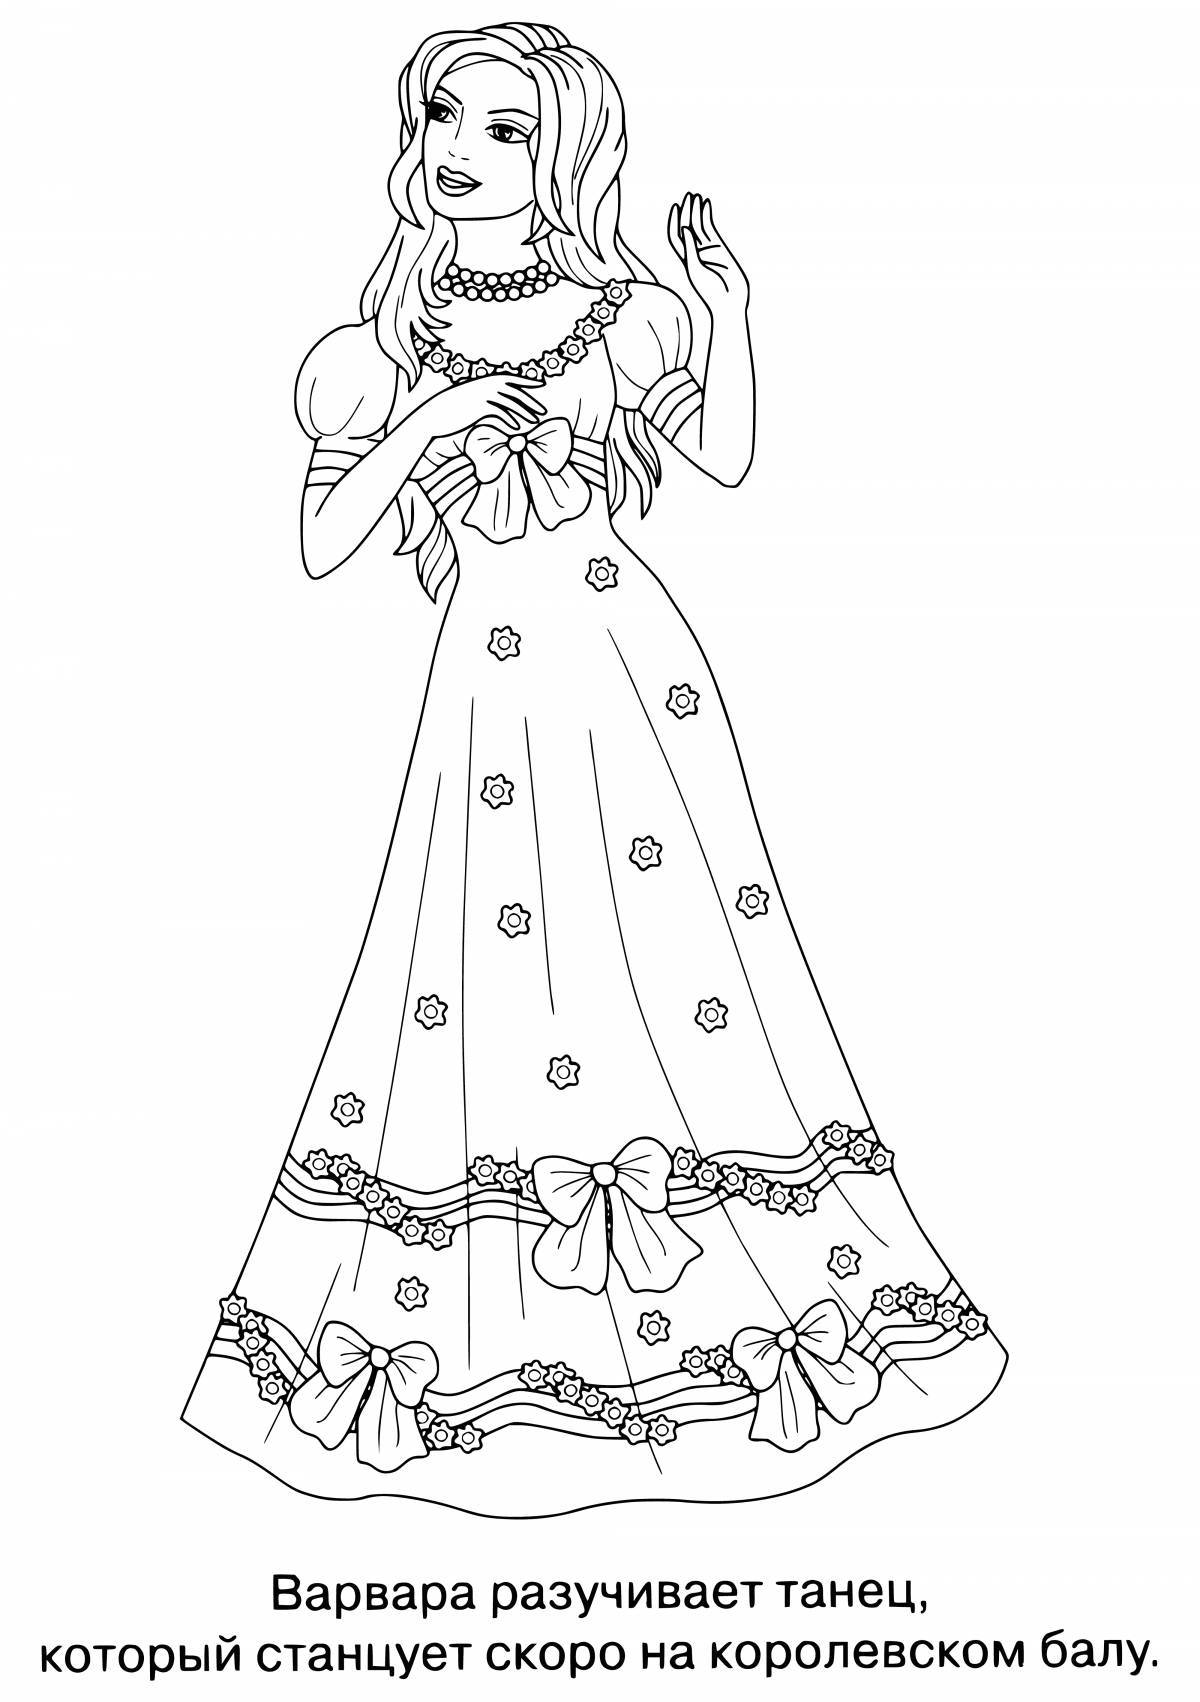 Cute coloring pages of princesses in beautiful dresses